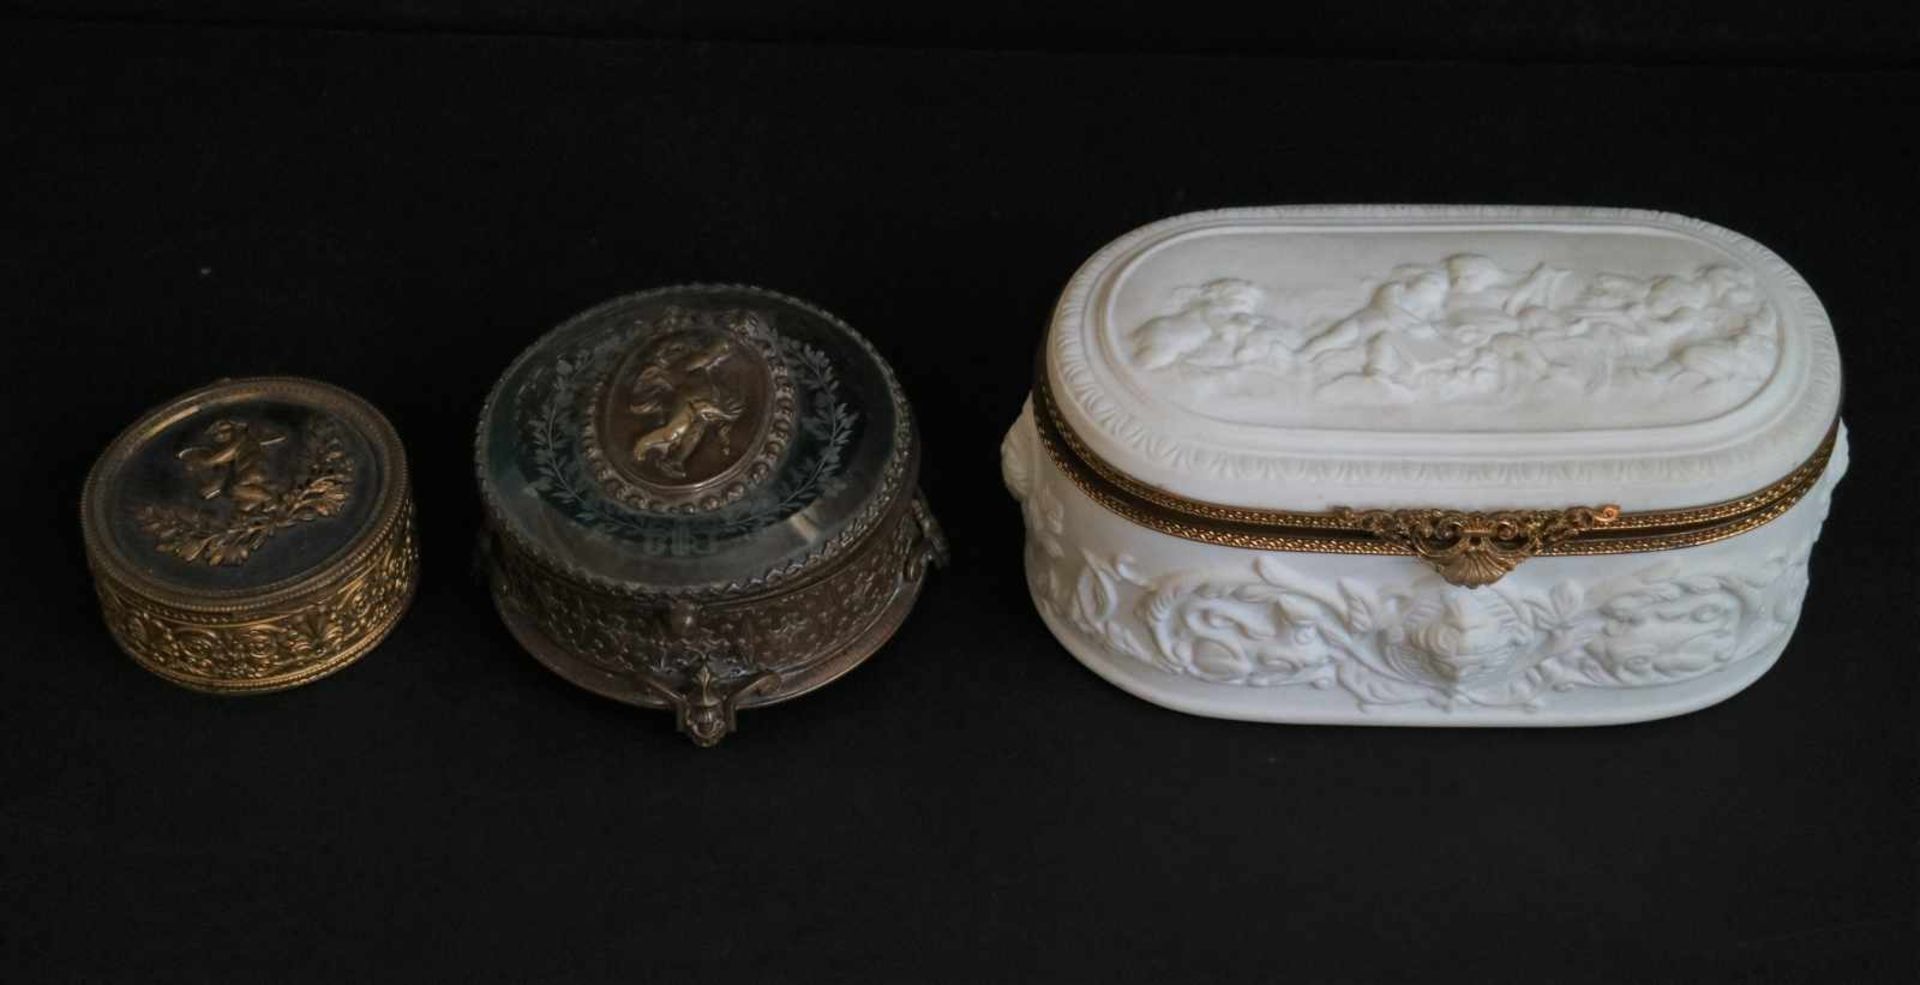 Lot of 3 jewelery boxes in biscuit